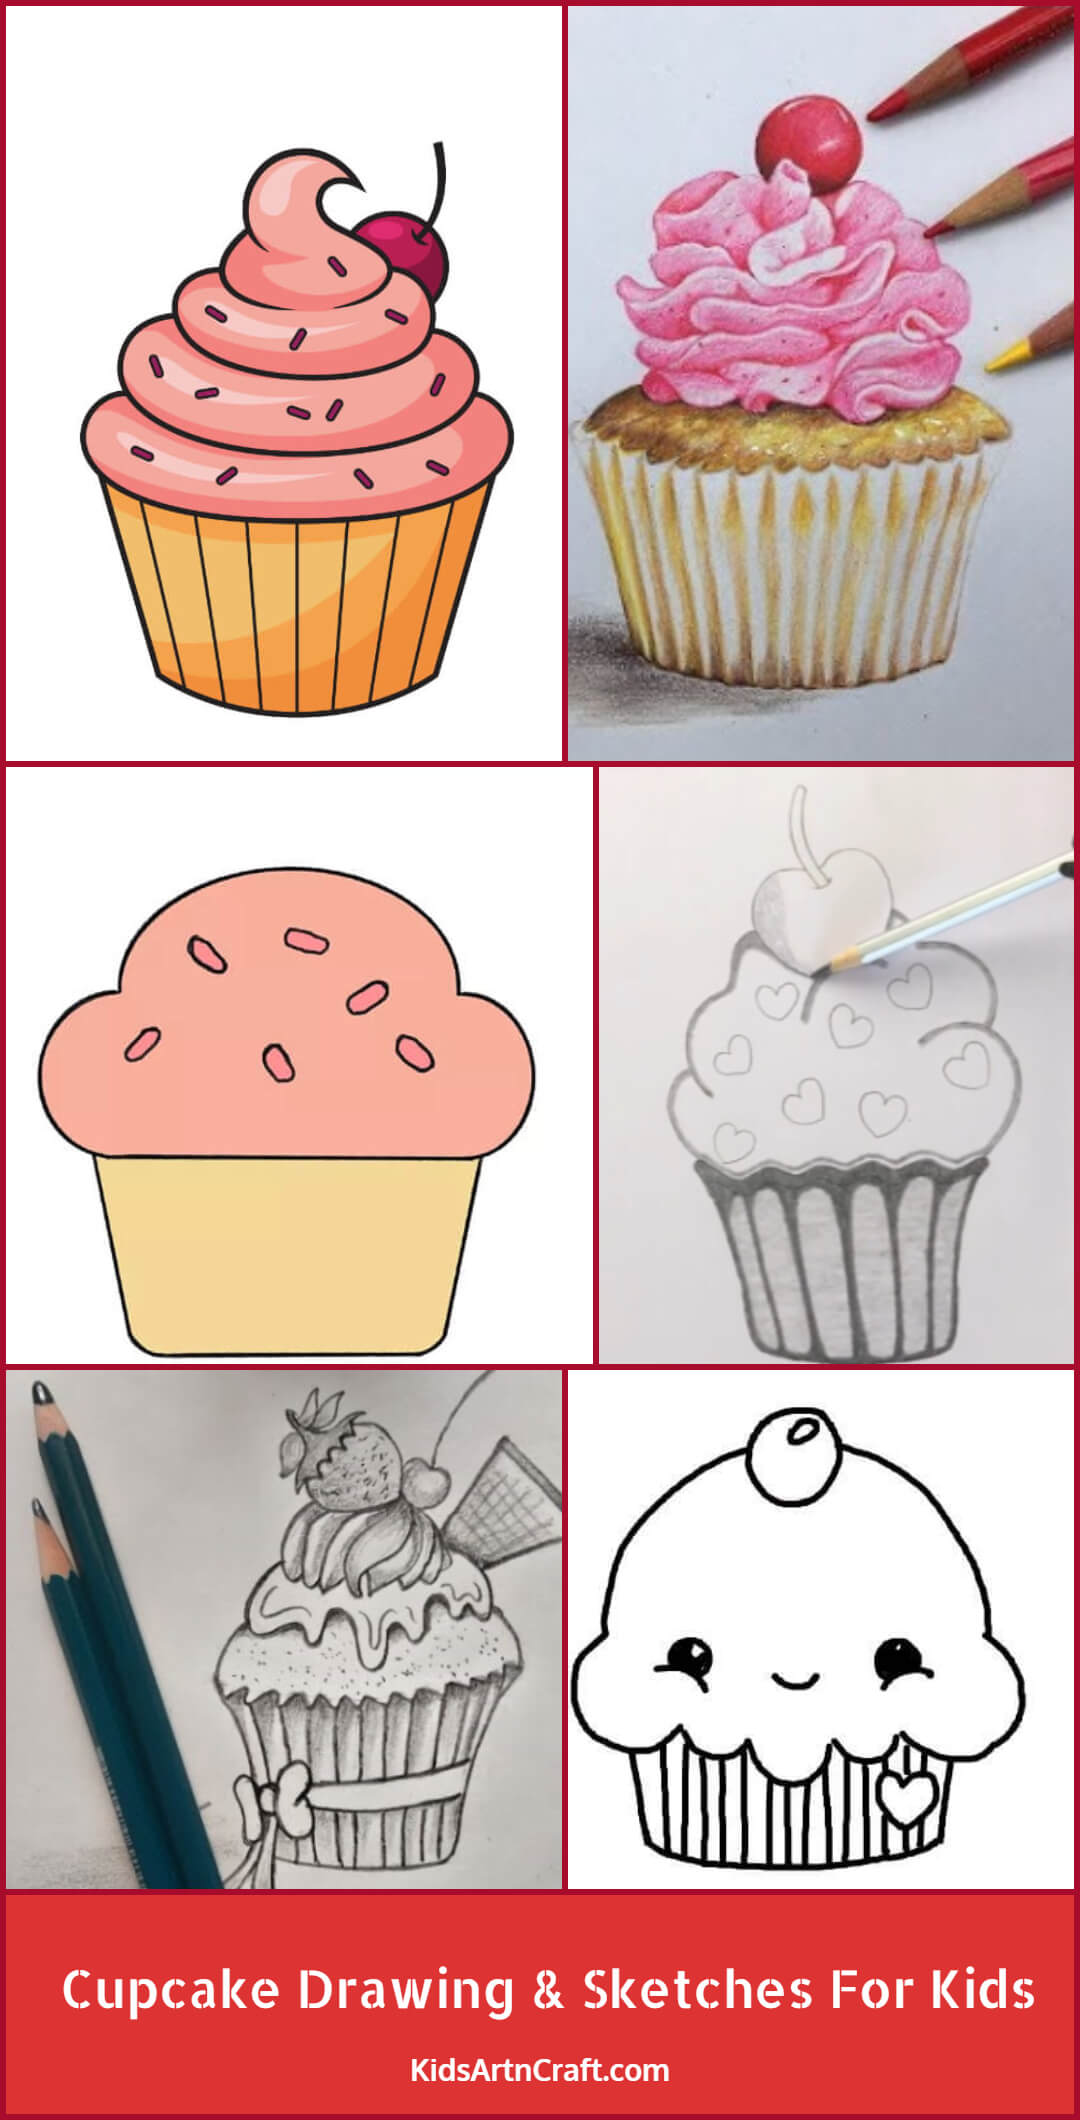 Cupcake Drawing & Sketches For Kids